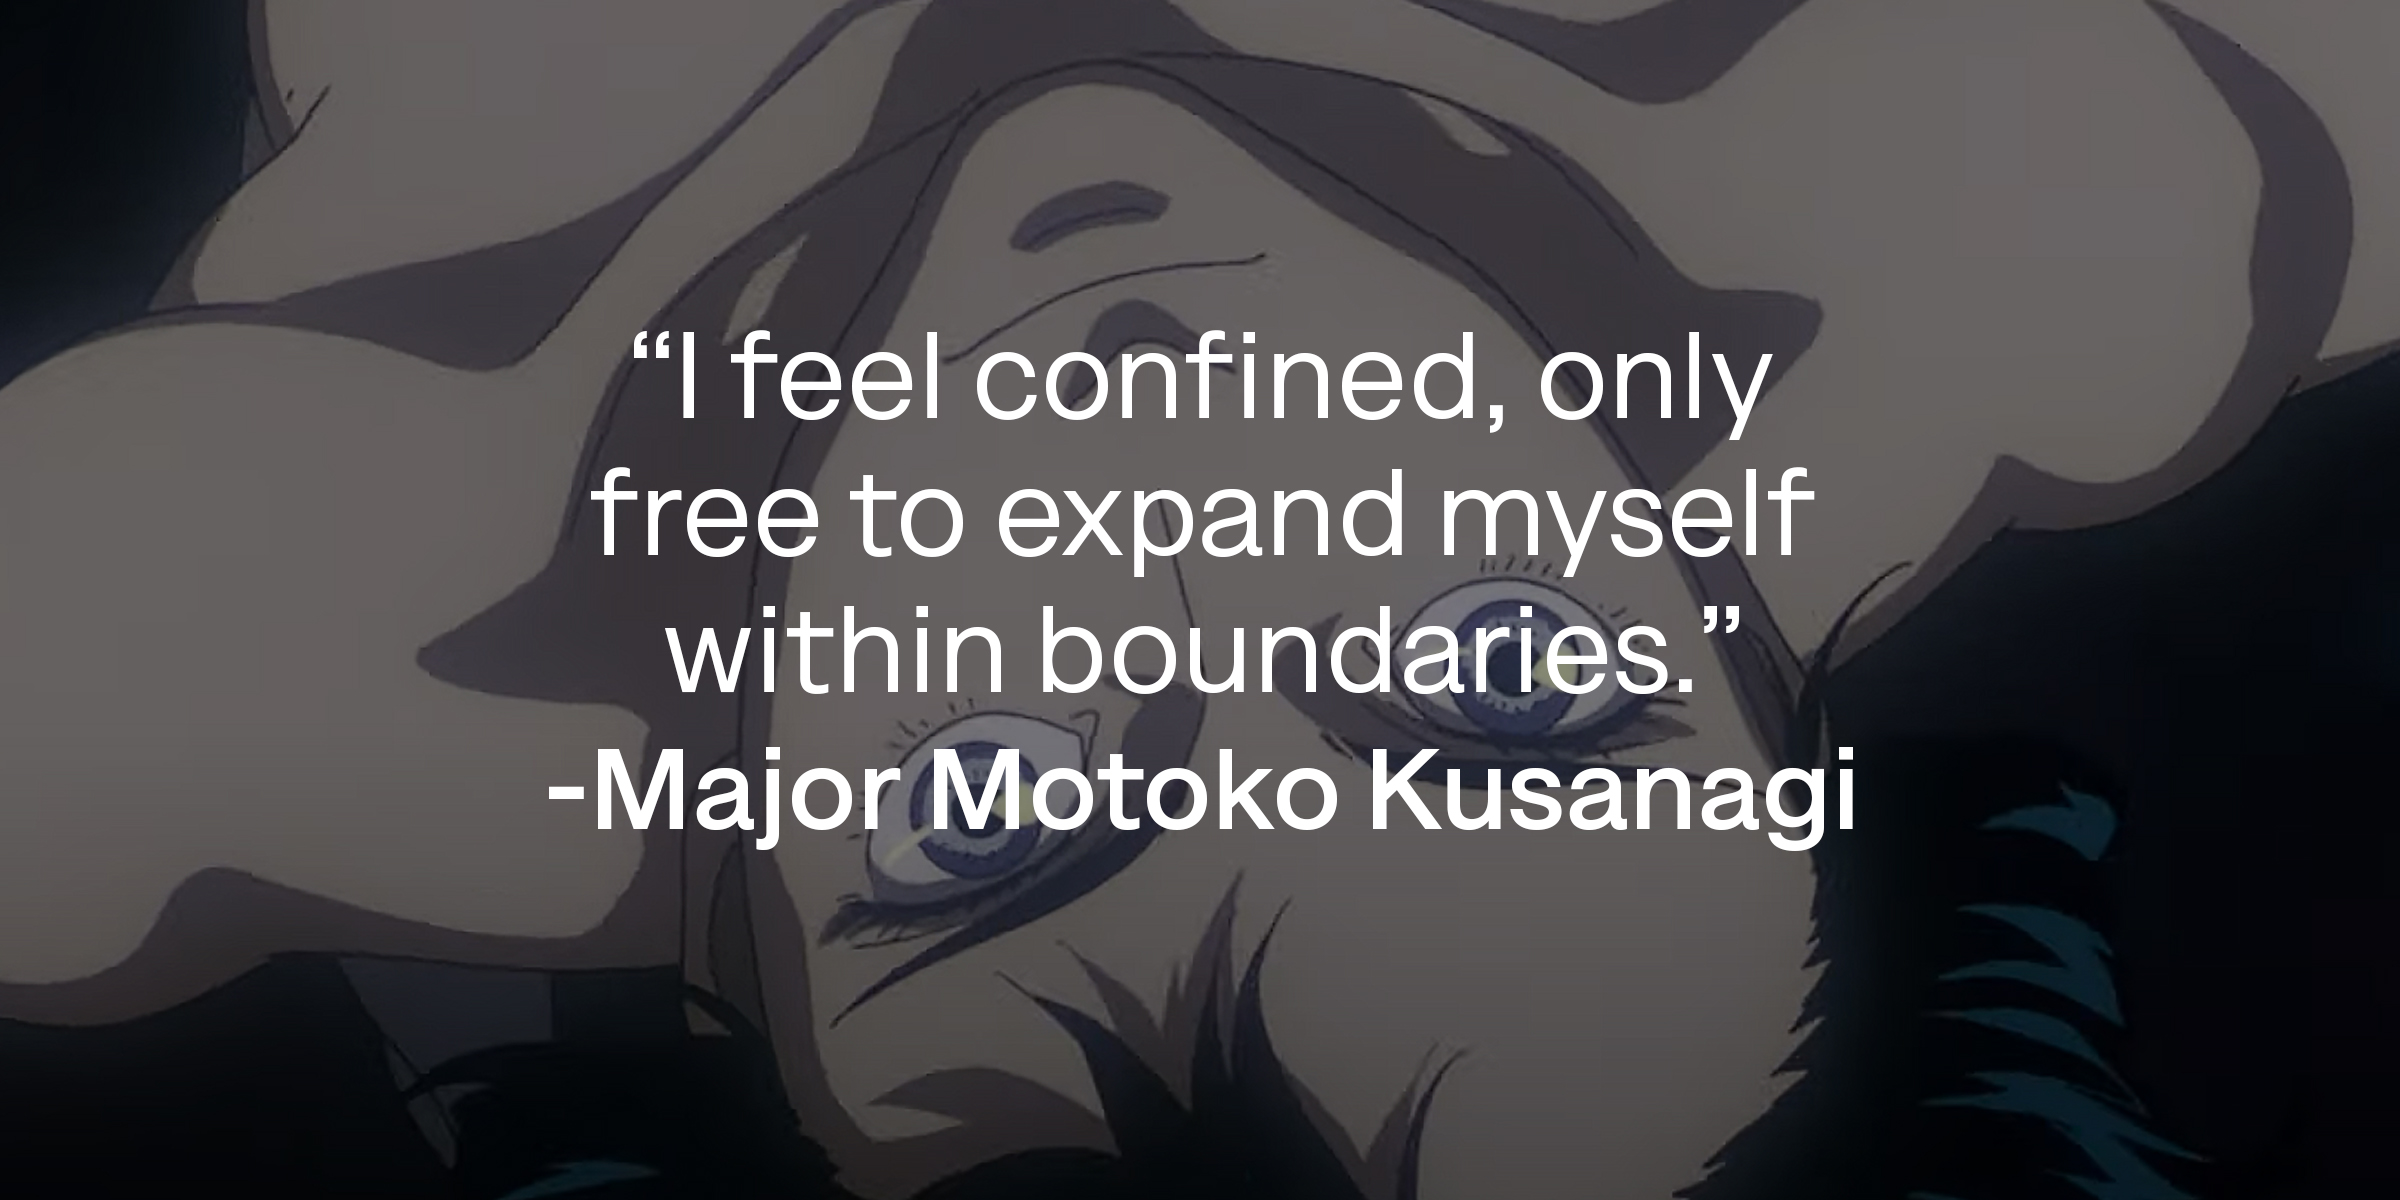 Major Motoko Kusanagi's quote, "I feel confined, only free to expand myself within boundaries." | Source: Youtube.com/LionsgateMovies